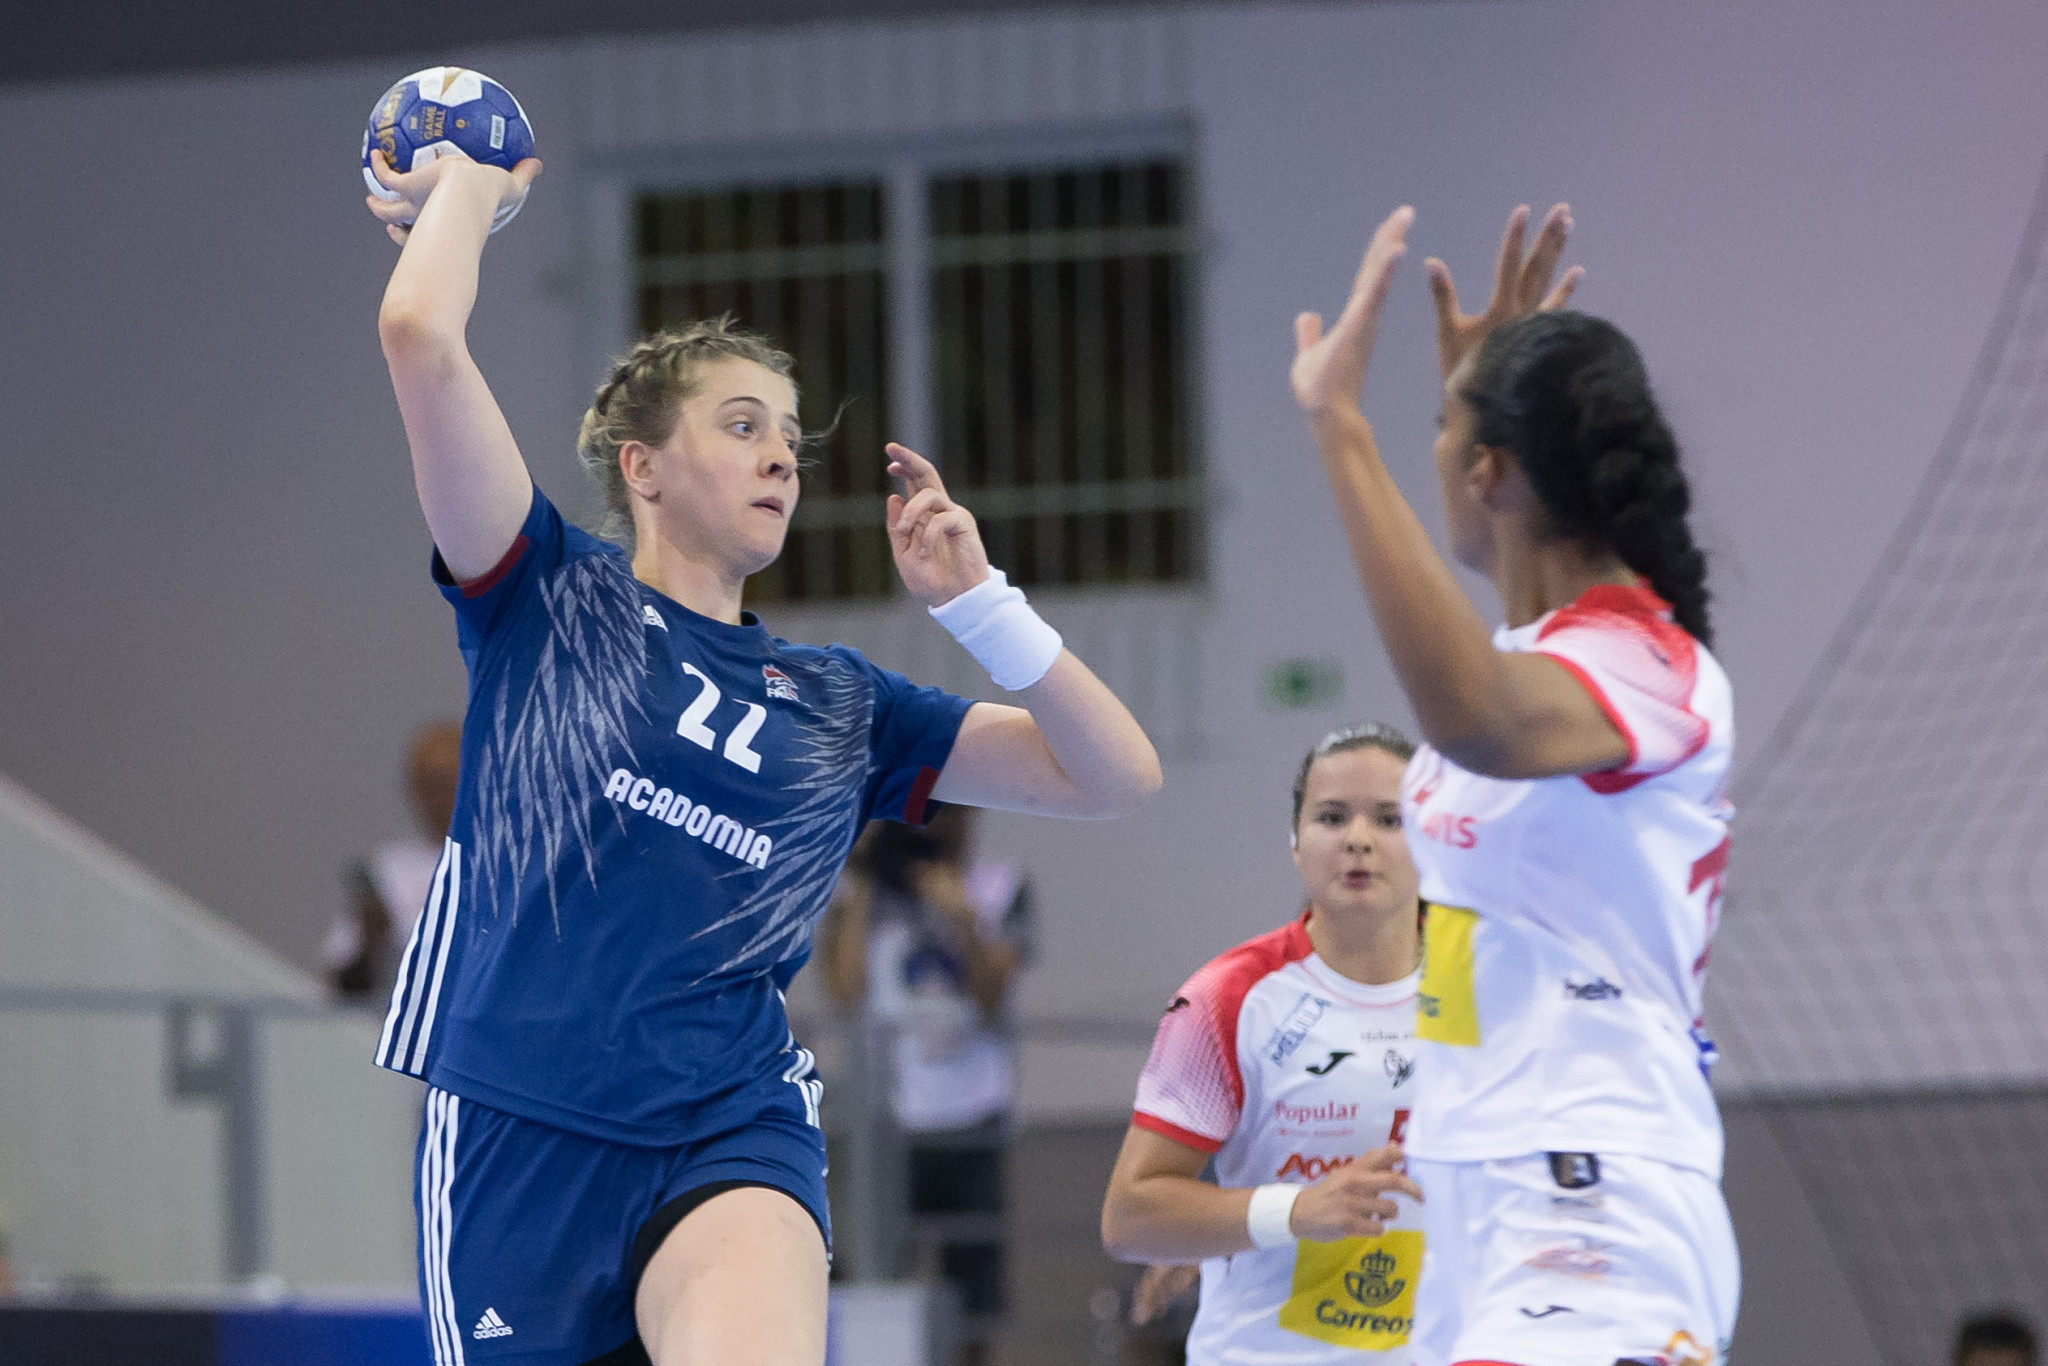 The Women's Junior World Handball Championship in Debrecen is nearing the end of the group phase ©Debrecen 2018